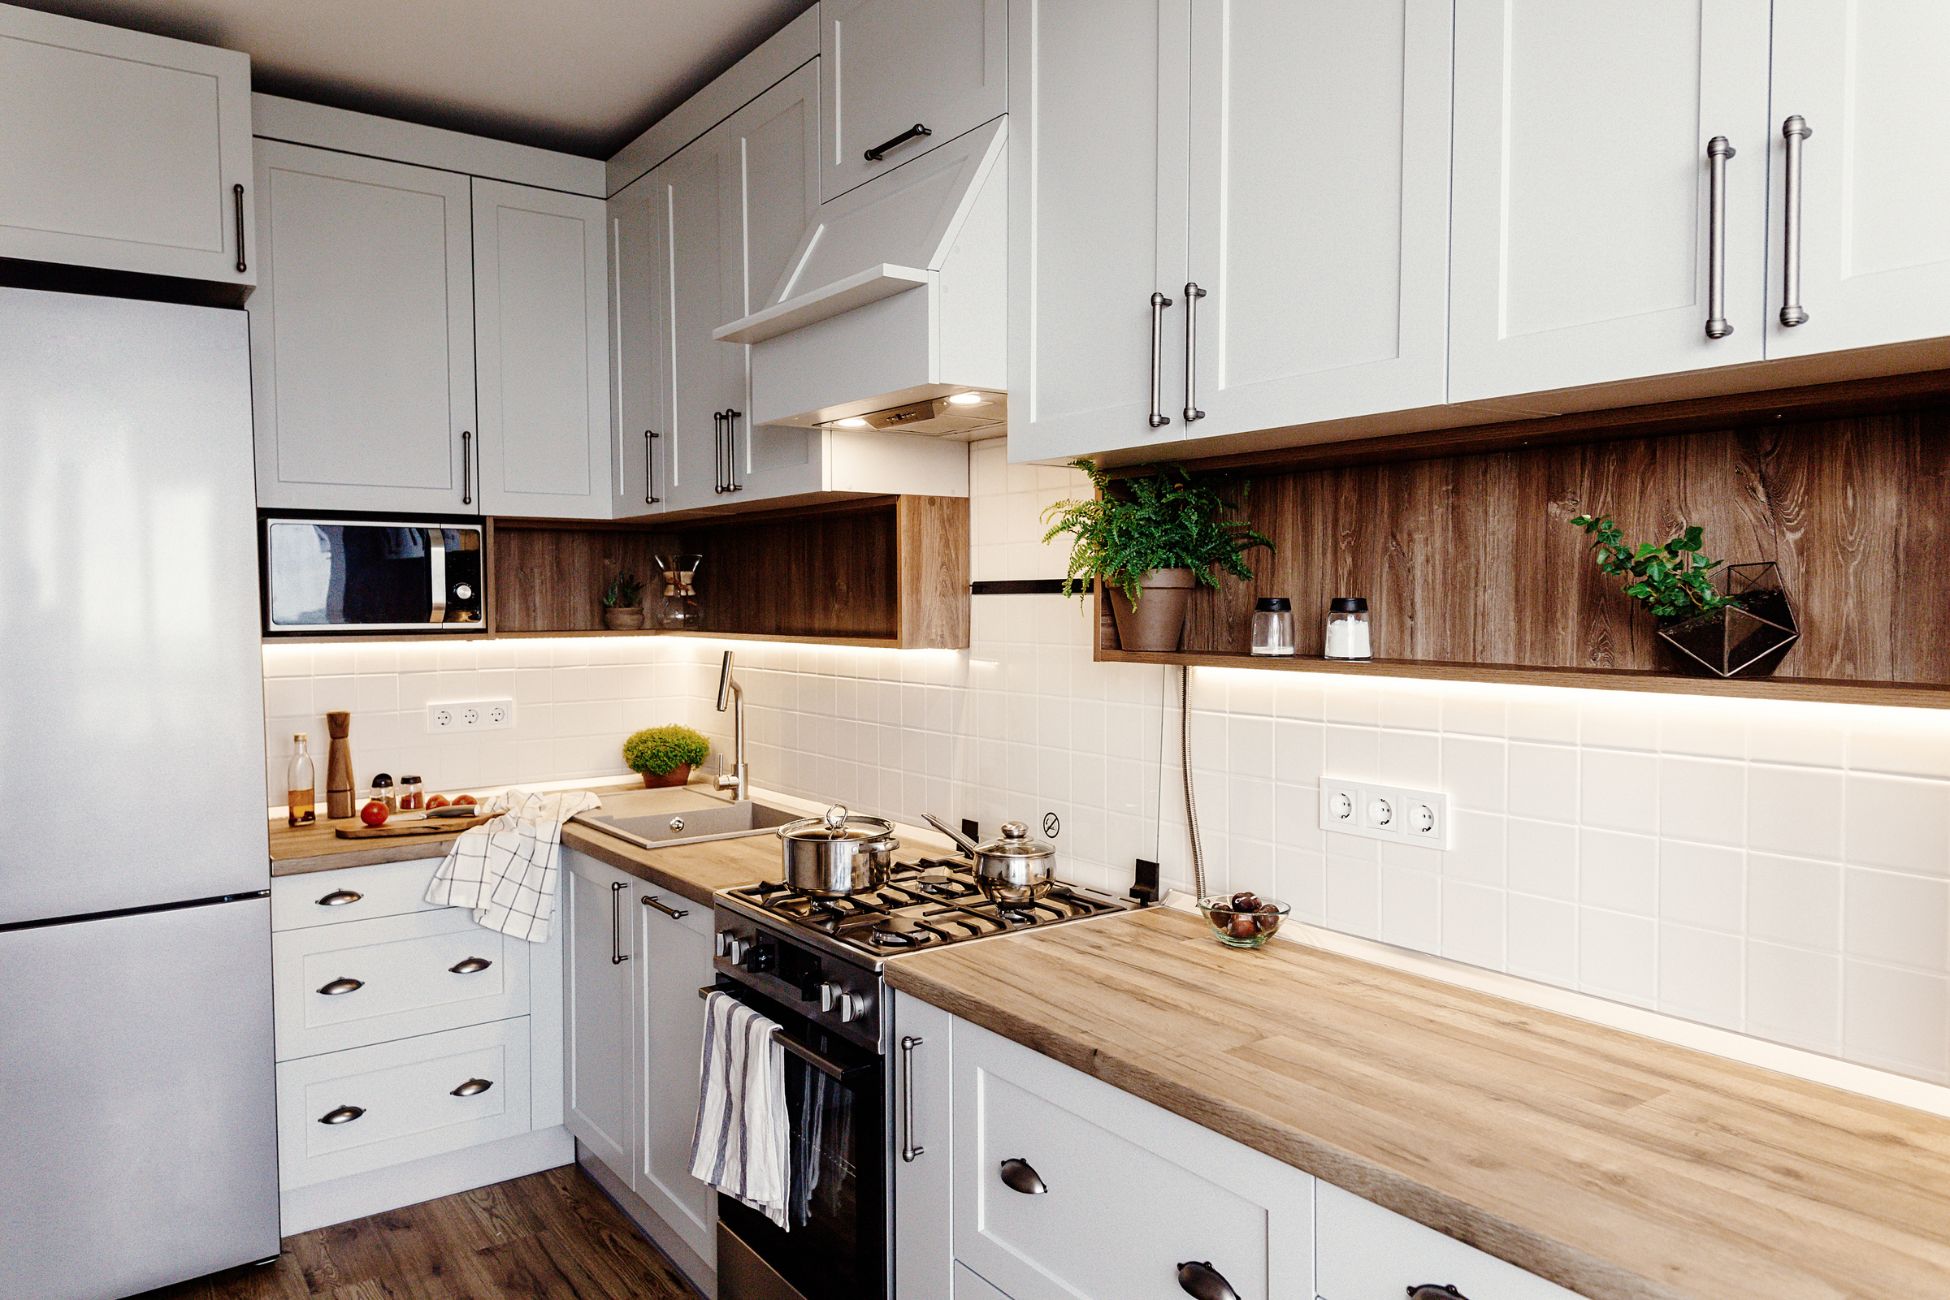 Simple white kitchen with wood countertop